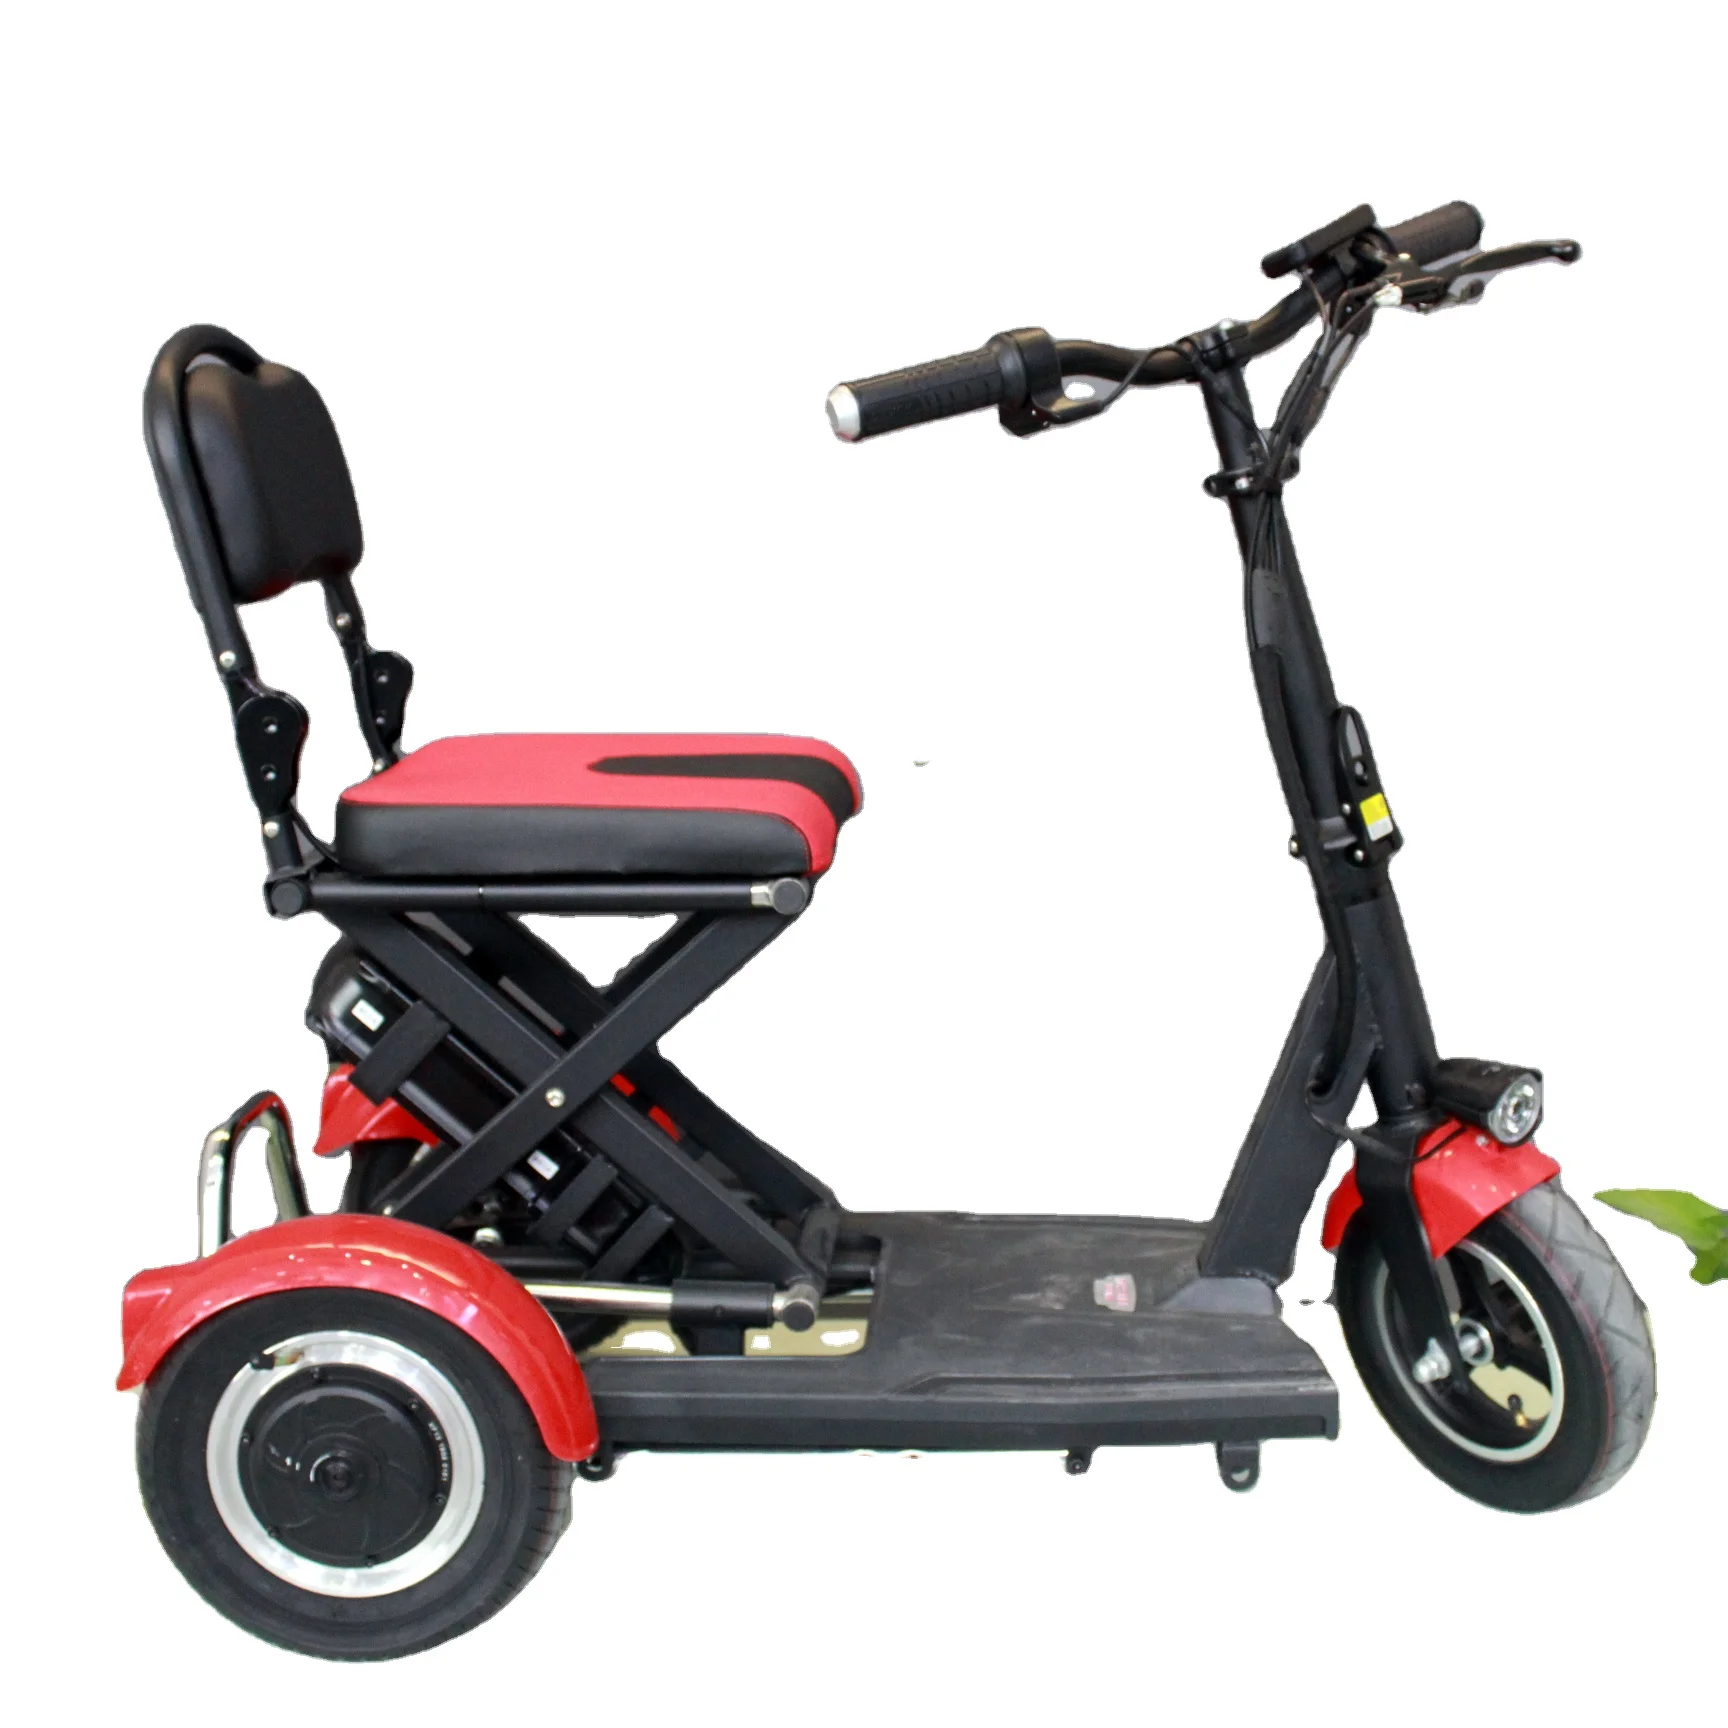 Electric Scooter Folding Type For Elderly And Disabled Handicapped Scooters 36v/48v 10Ah Lithium Battery Motor Scooter custom